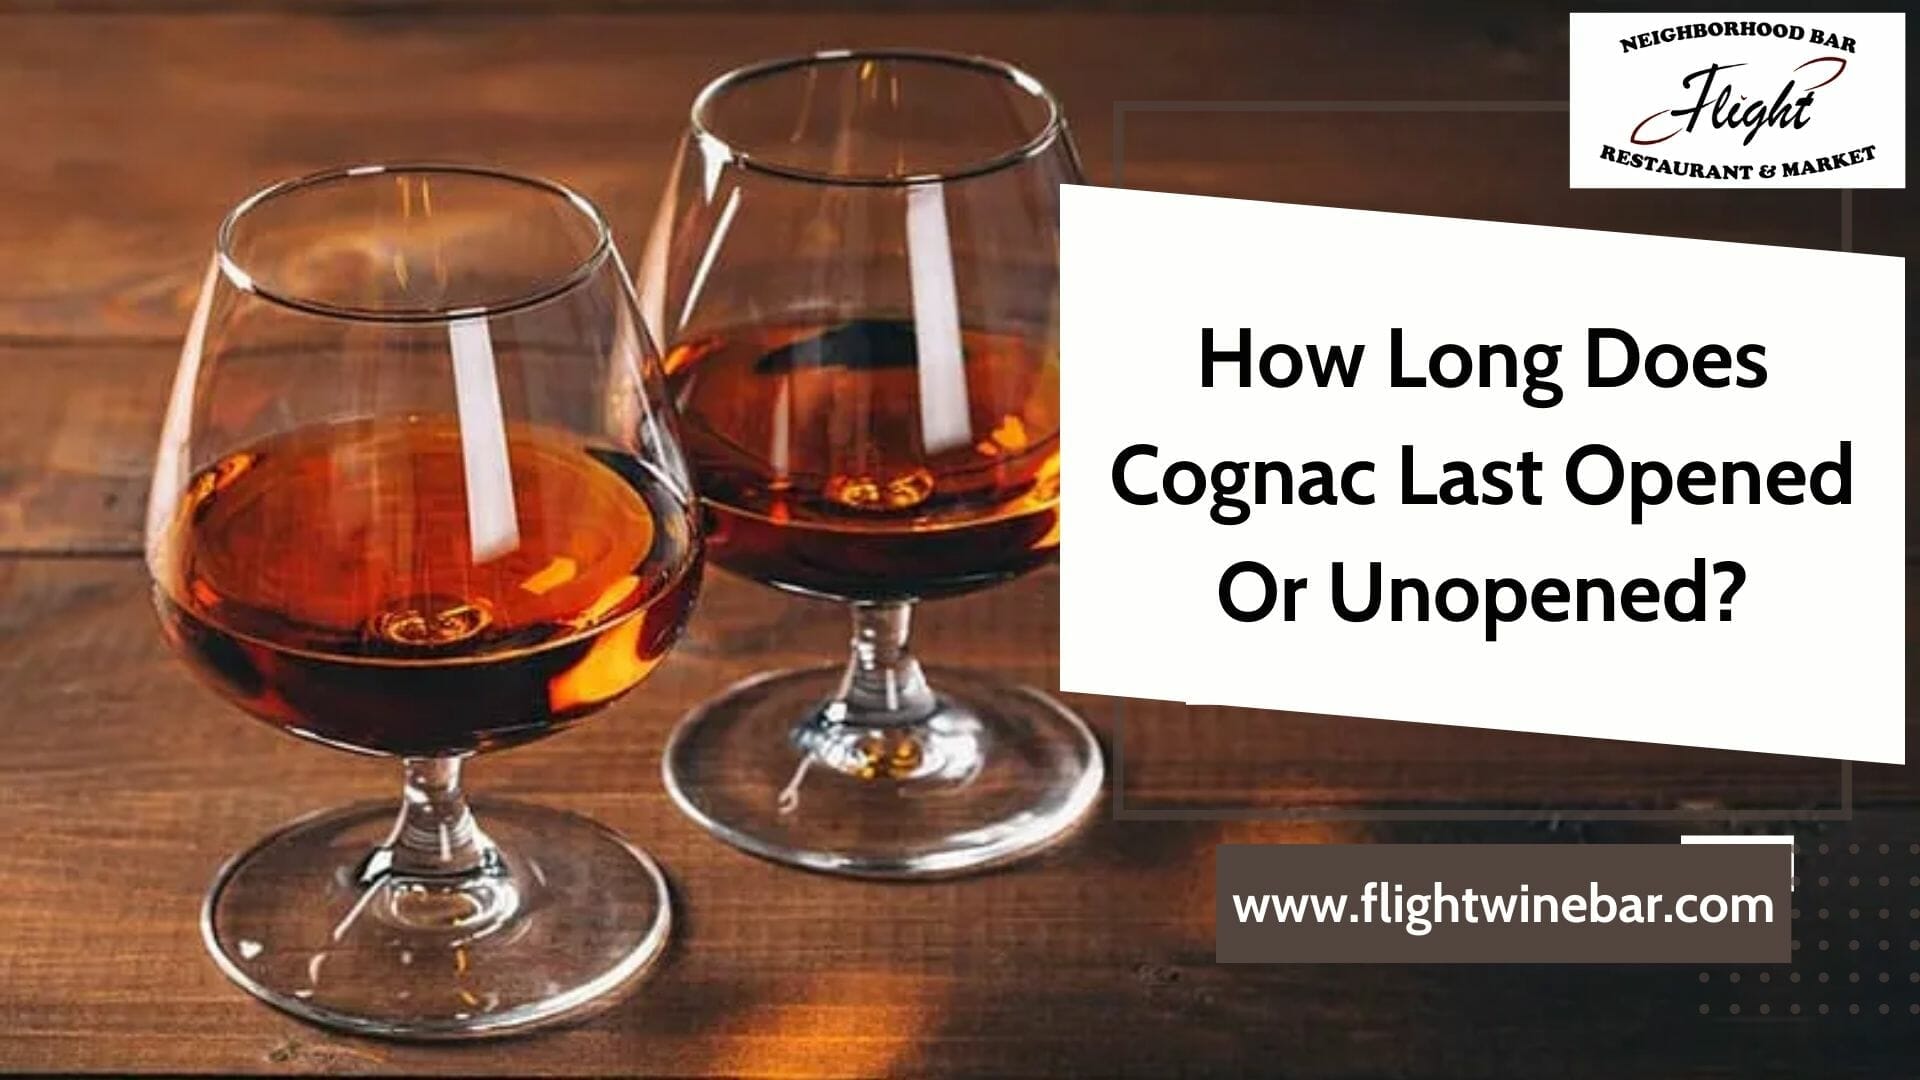 How Long Does Cognac Last Opened Or Unopened